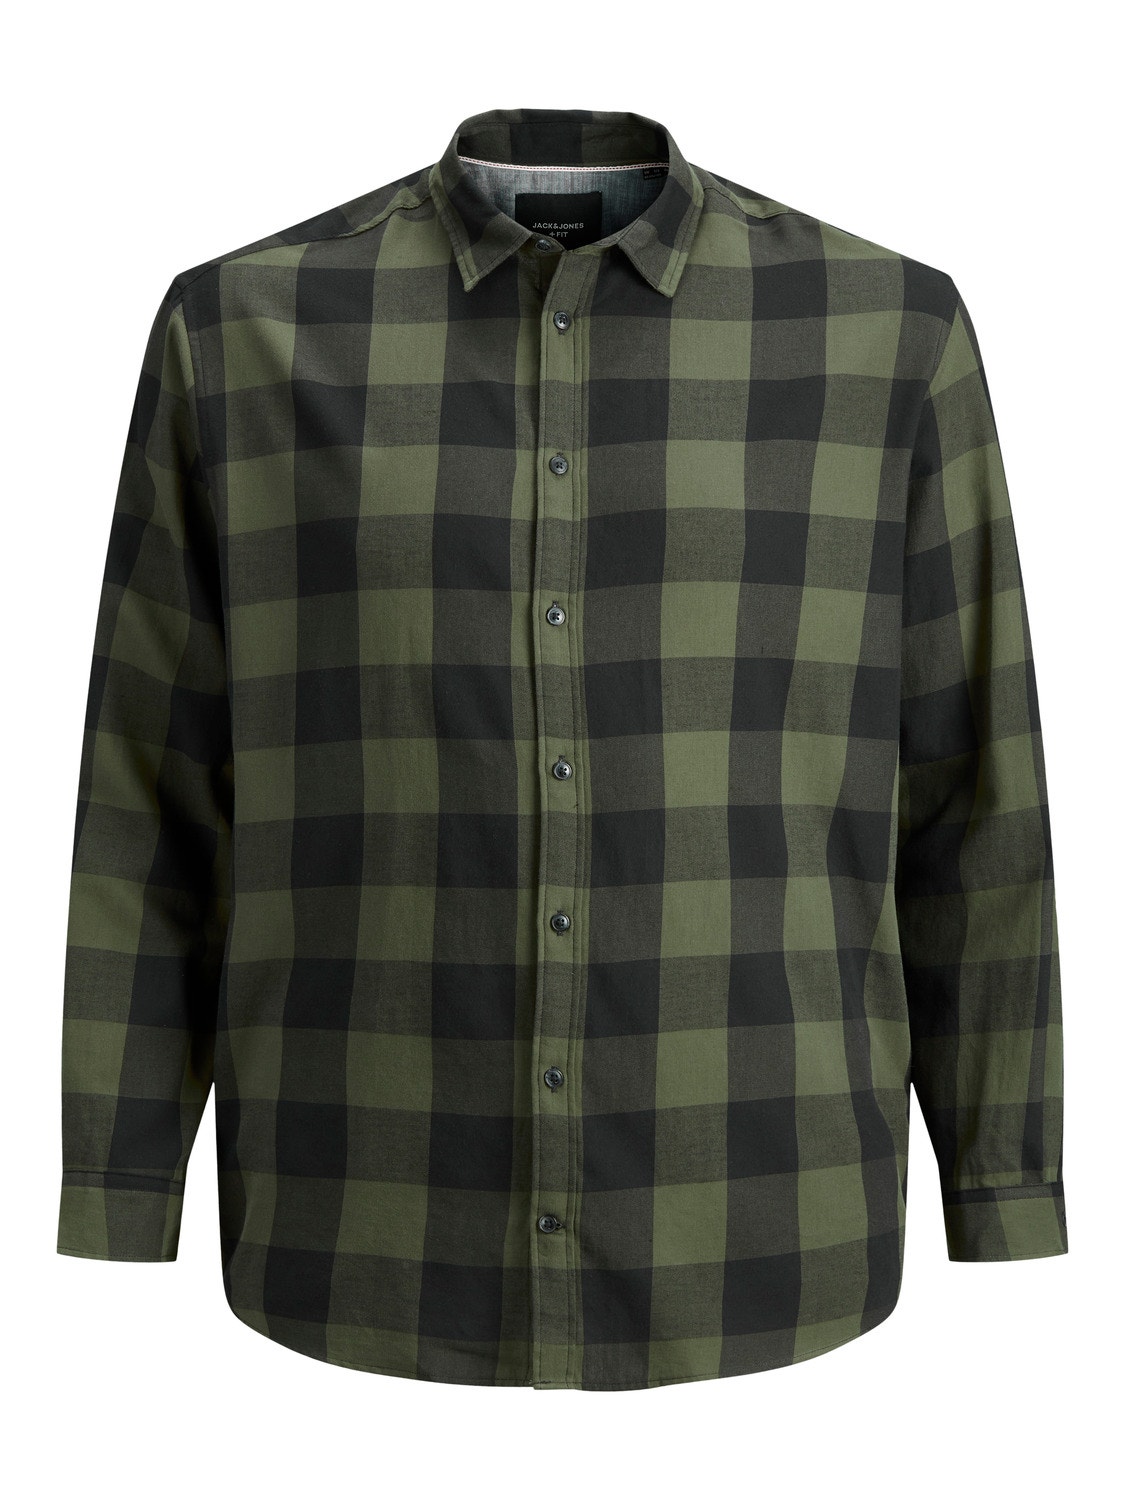 Jack & Jones Plus Size Camisa a cuadros Loose Fit -Dusty Olive - 12183107